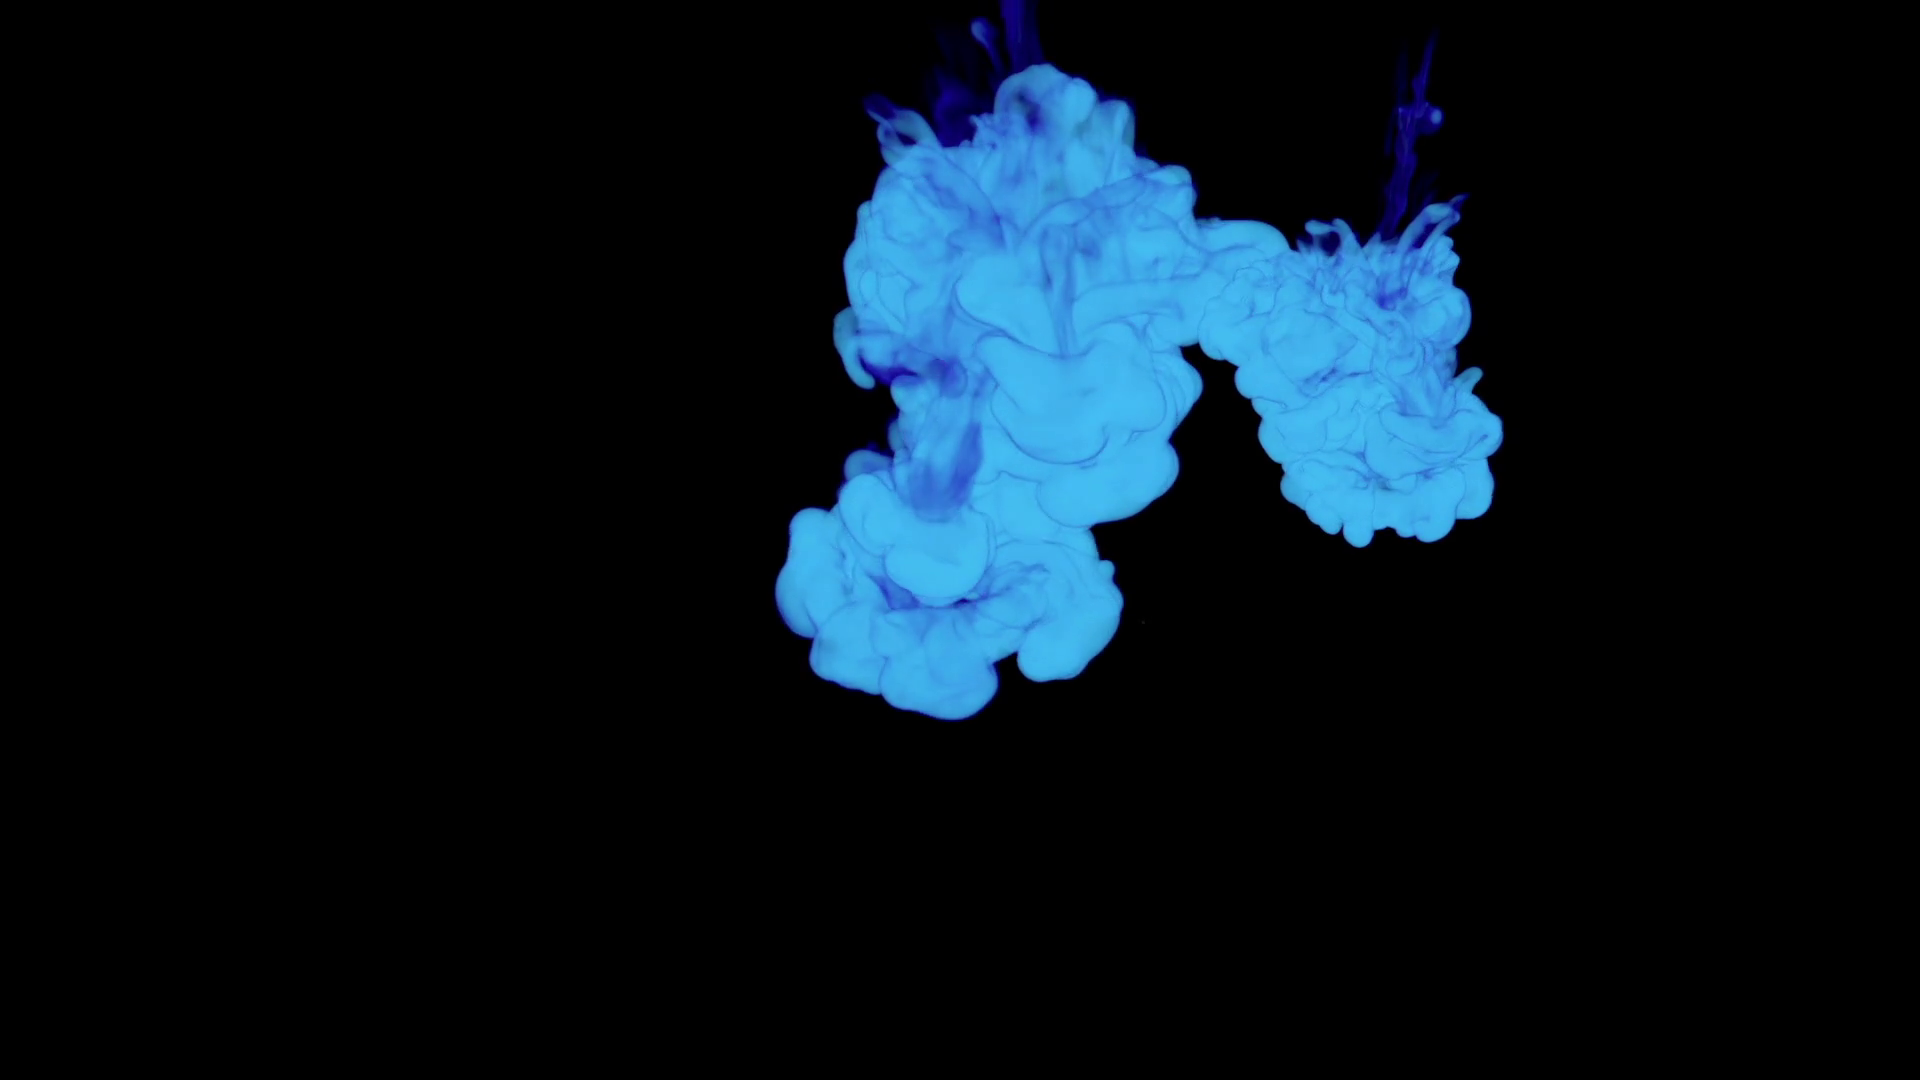 ABSTRACT BACKGROUND. BLUE SMOKE or BLUE INK IN WATER SERIES ON BLACK ...